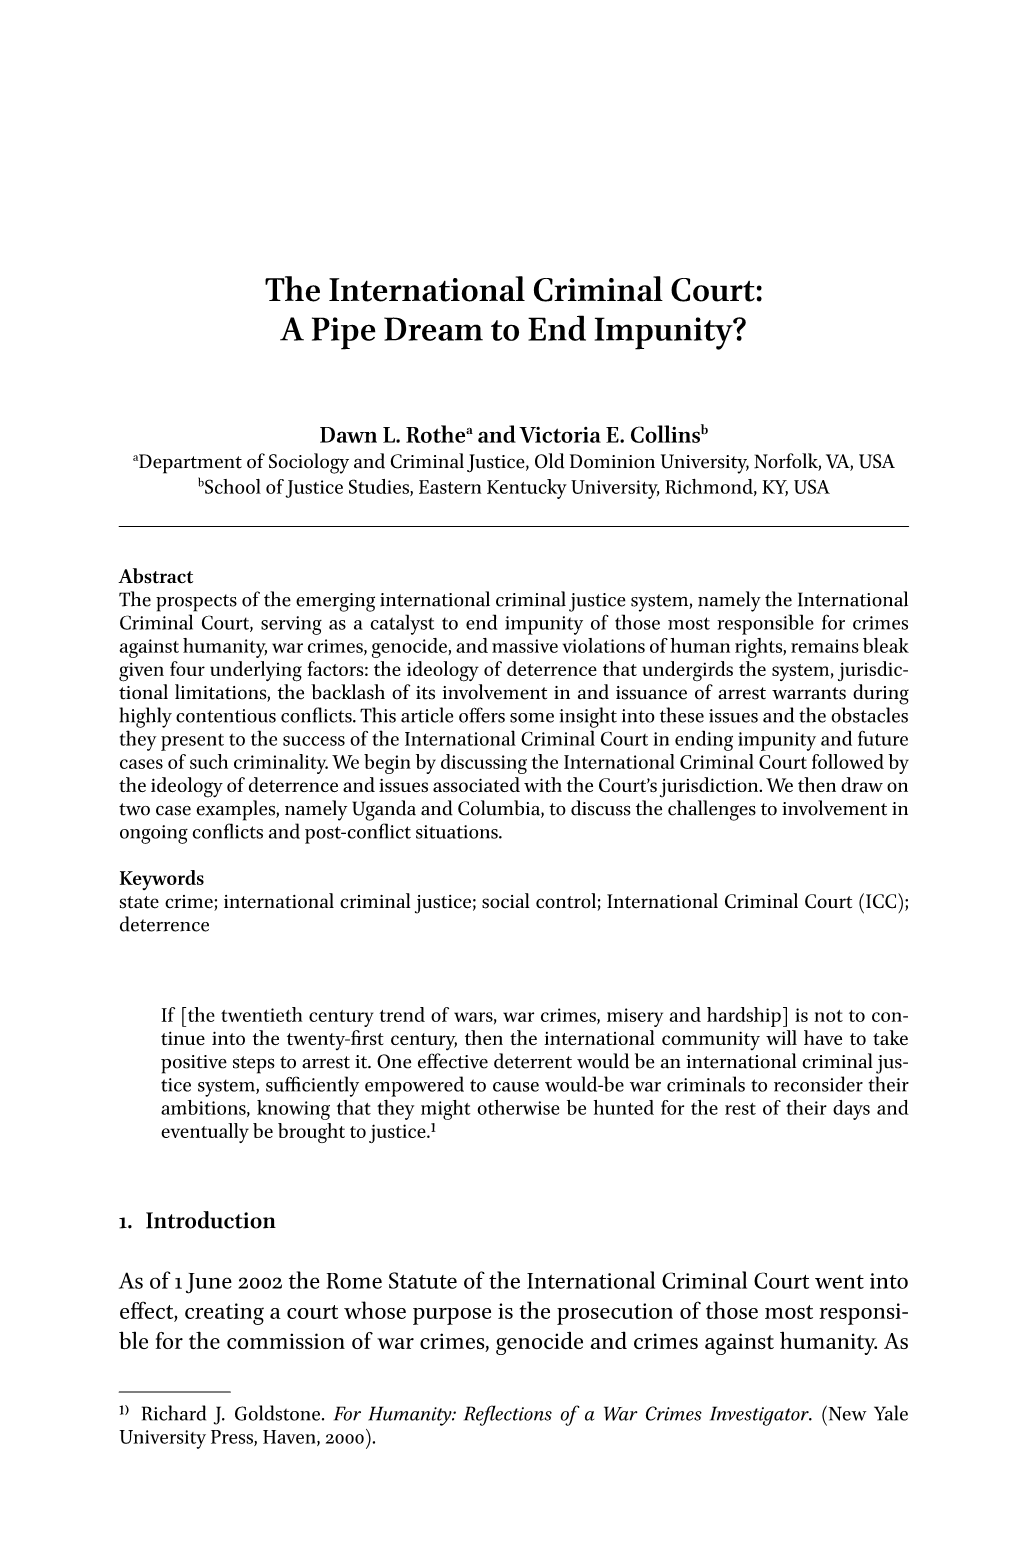 The International Criminal Court: a Pipe Dream to End Impunity?